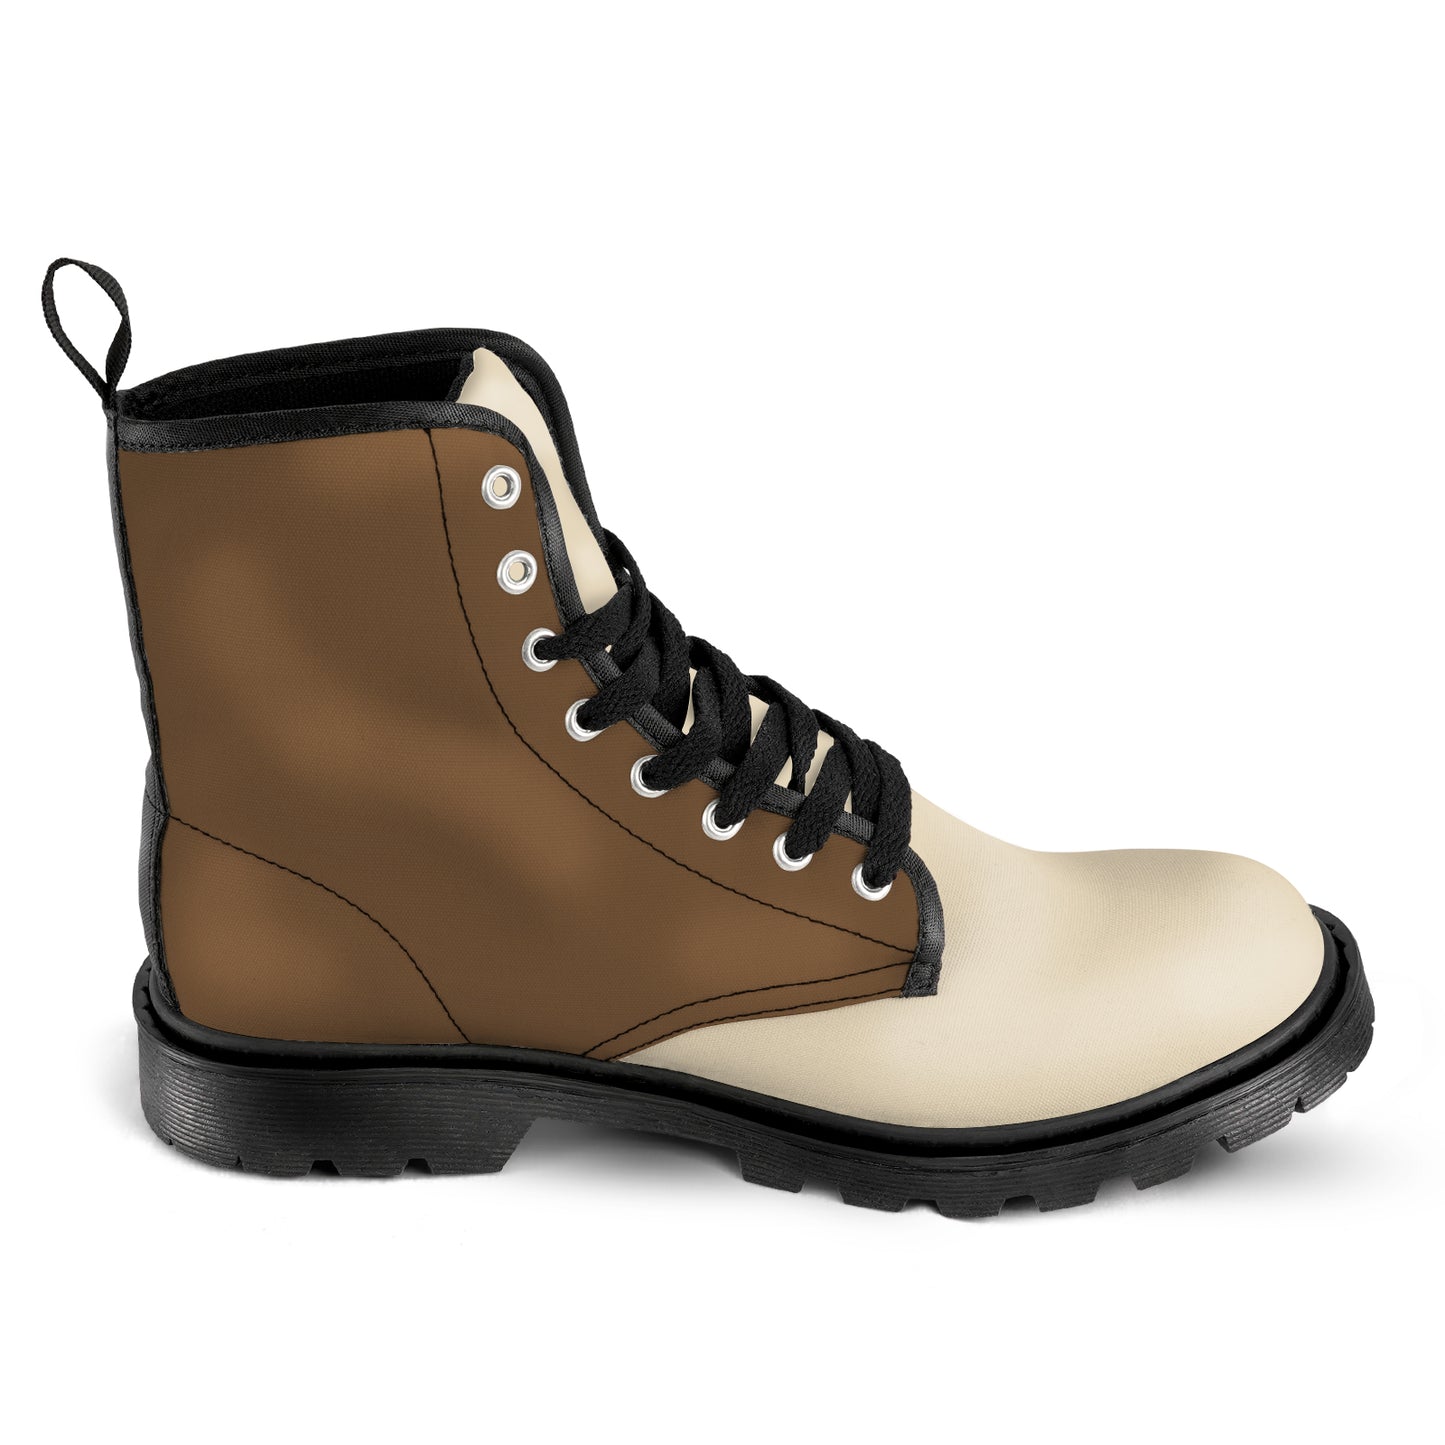 Men's Lace Up Canvas Boots - Classic Brown